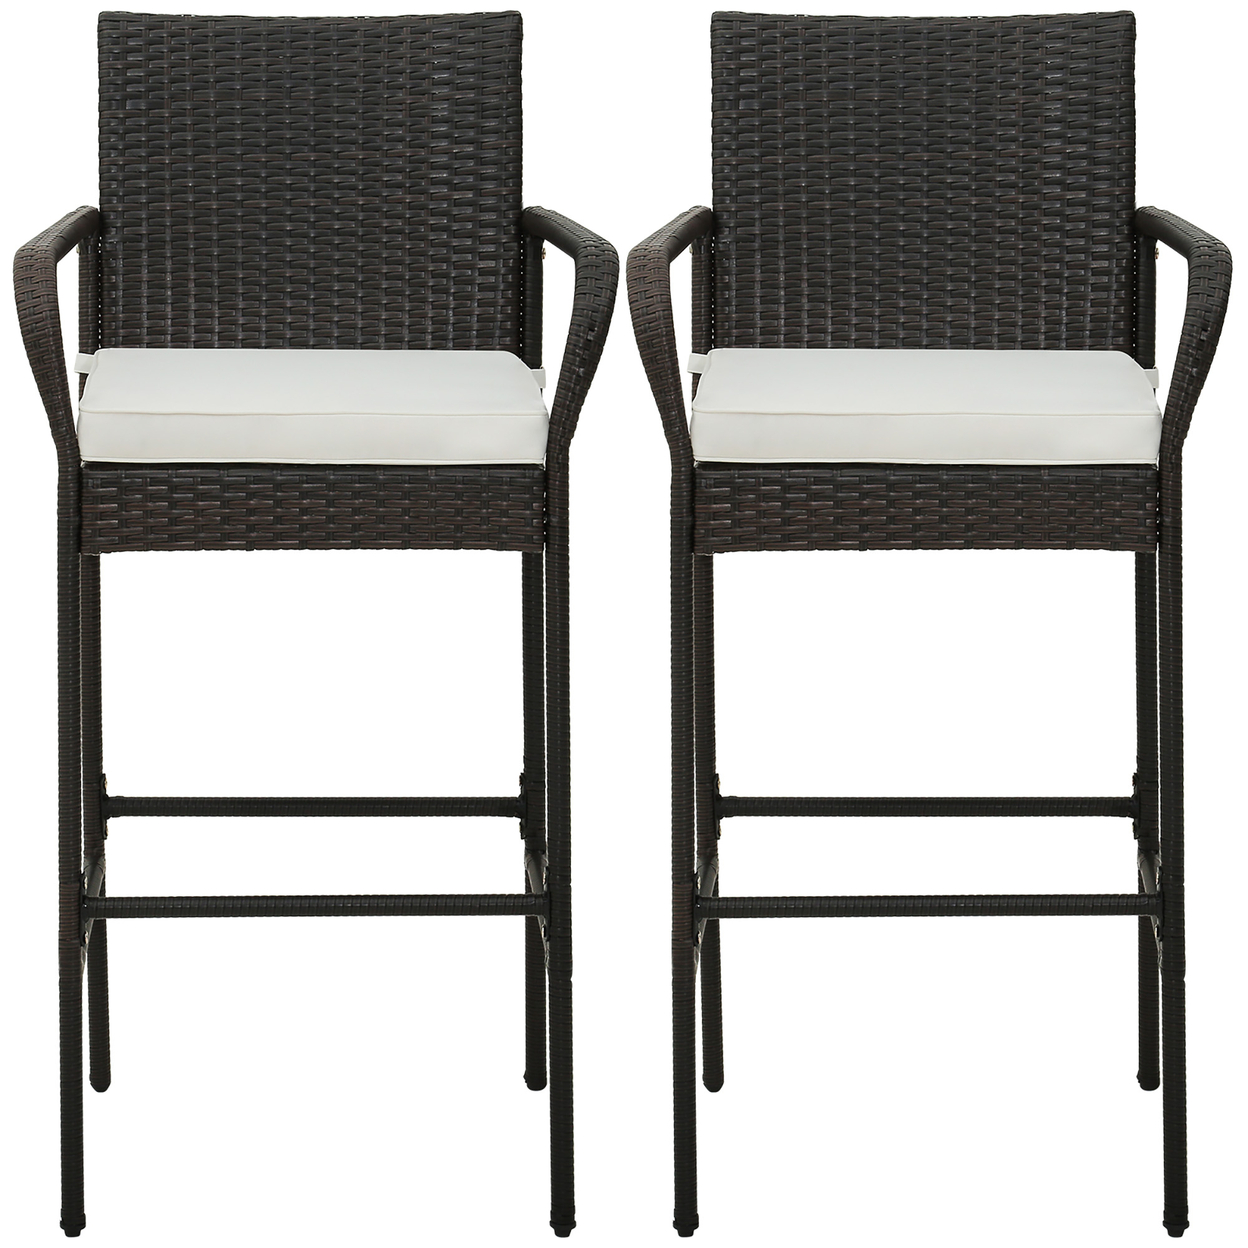 Set Of 2 Wicker Bar Stools Set Outdoor High Back Bar Counter Chairs W/ Cushions